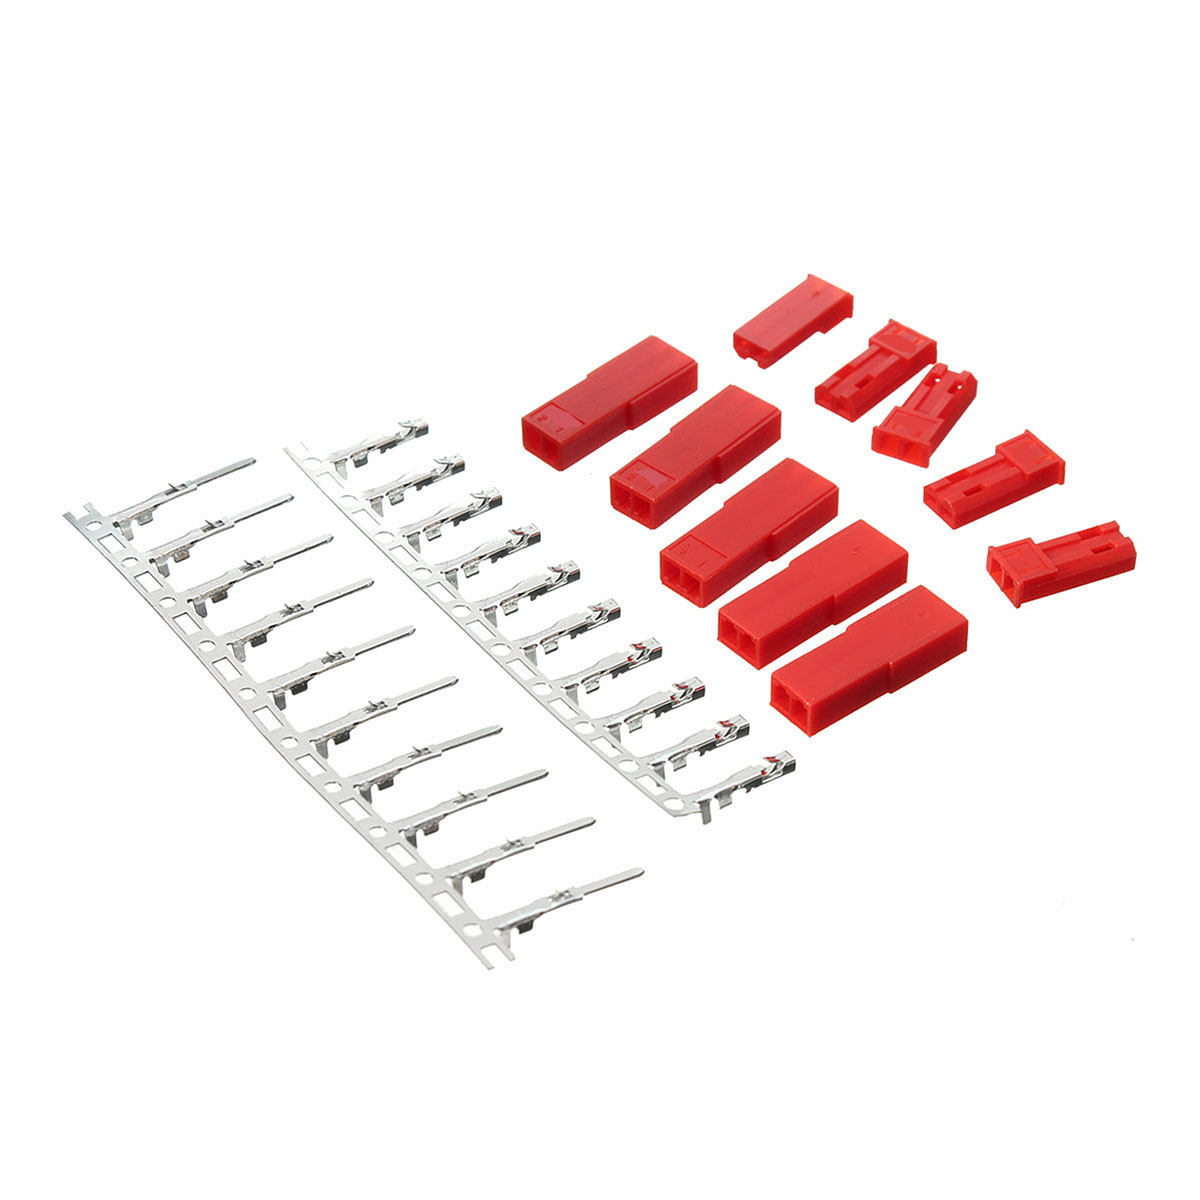 Excellway-20Pcs-JST-Female-and-Male-Battery-Connector-Set-1186036-3